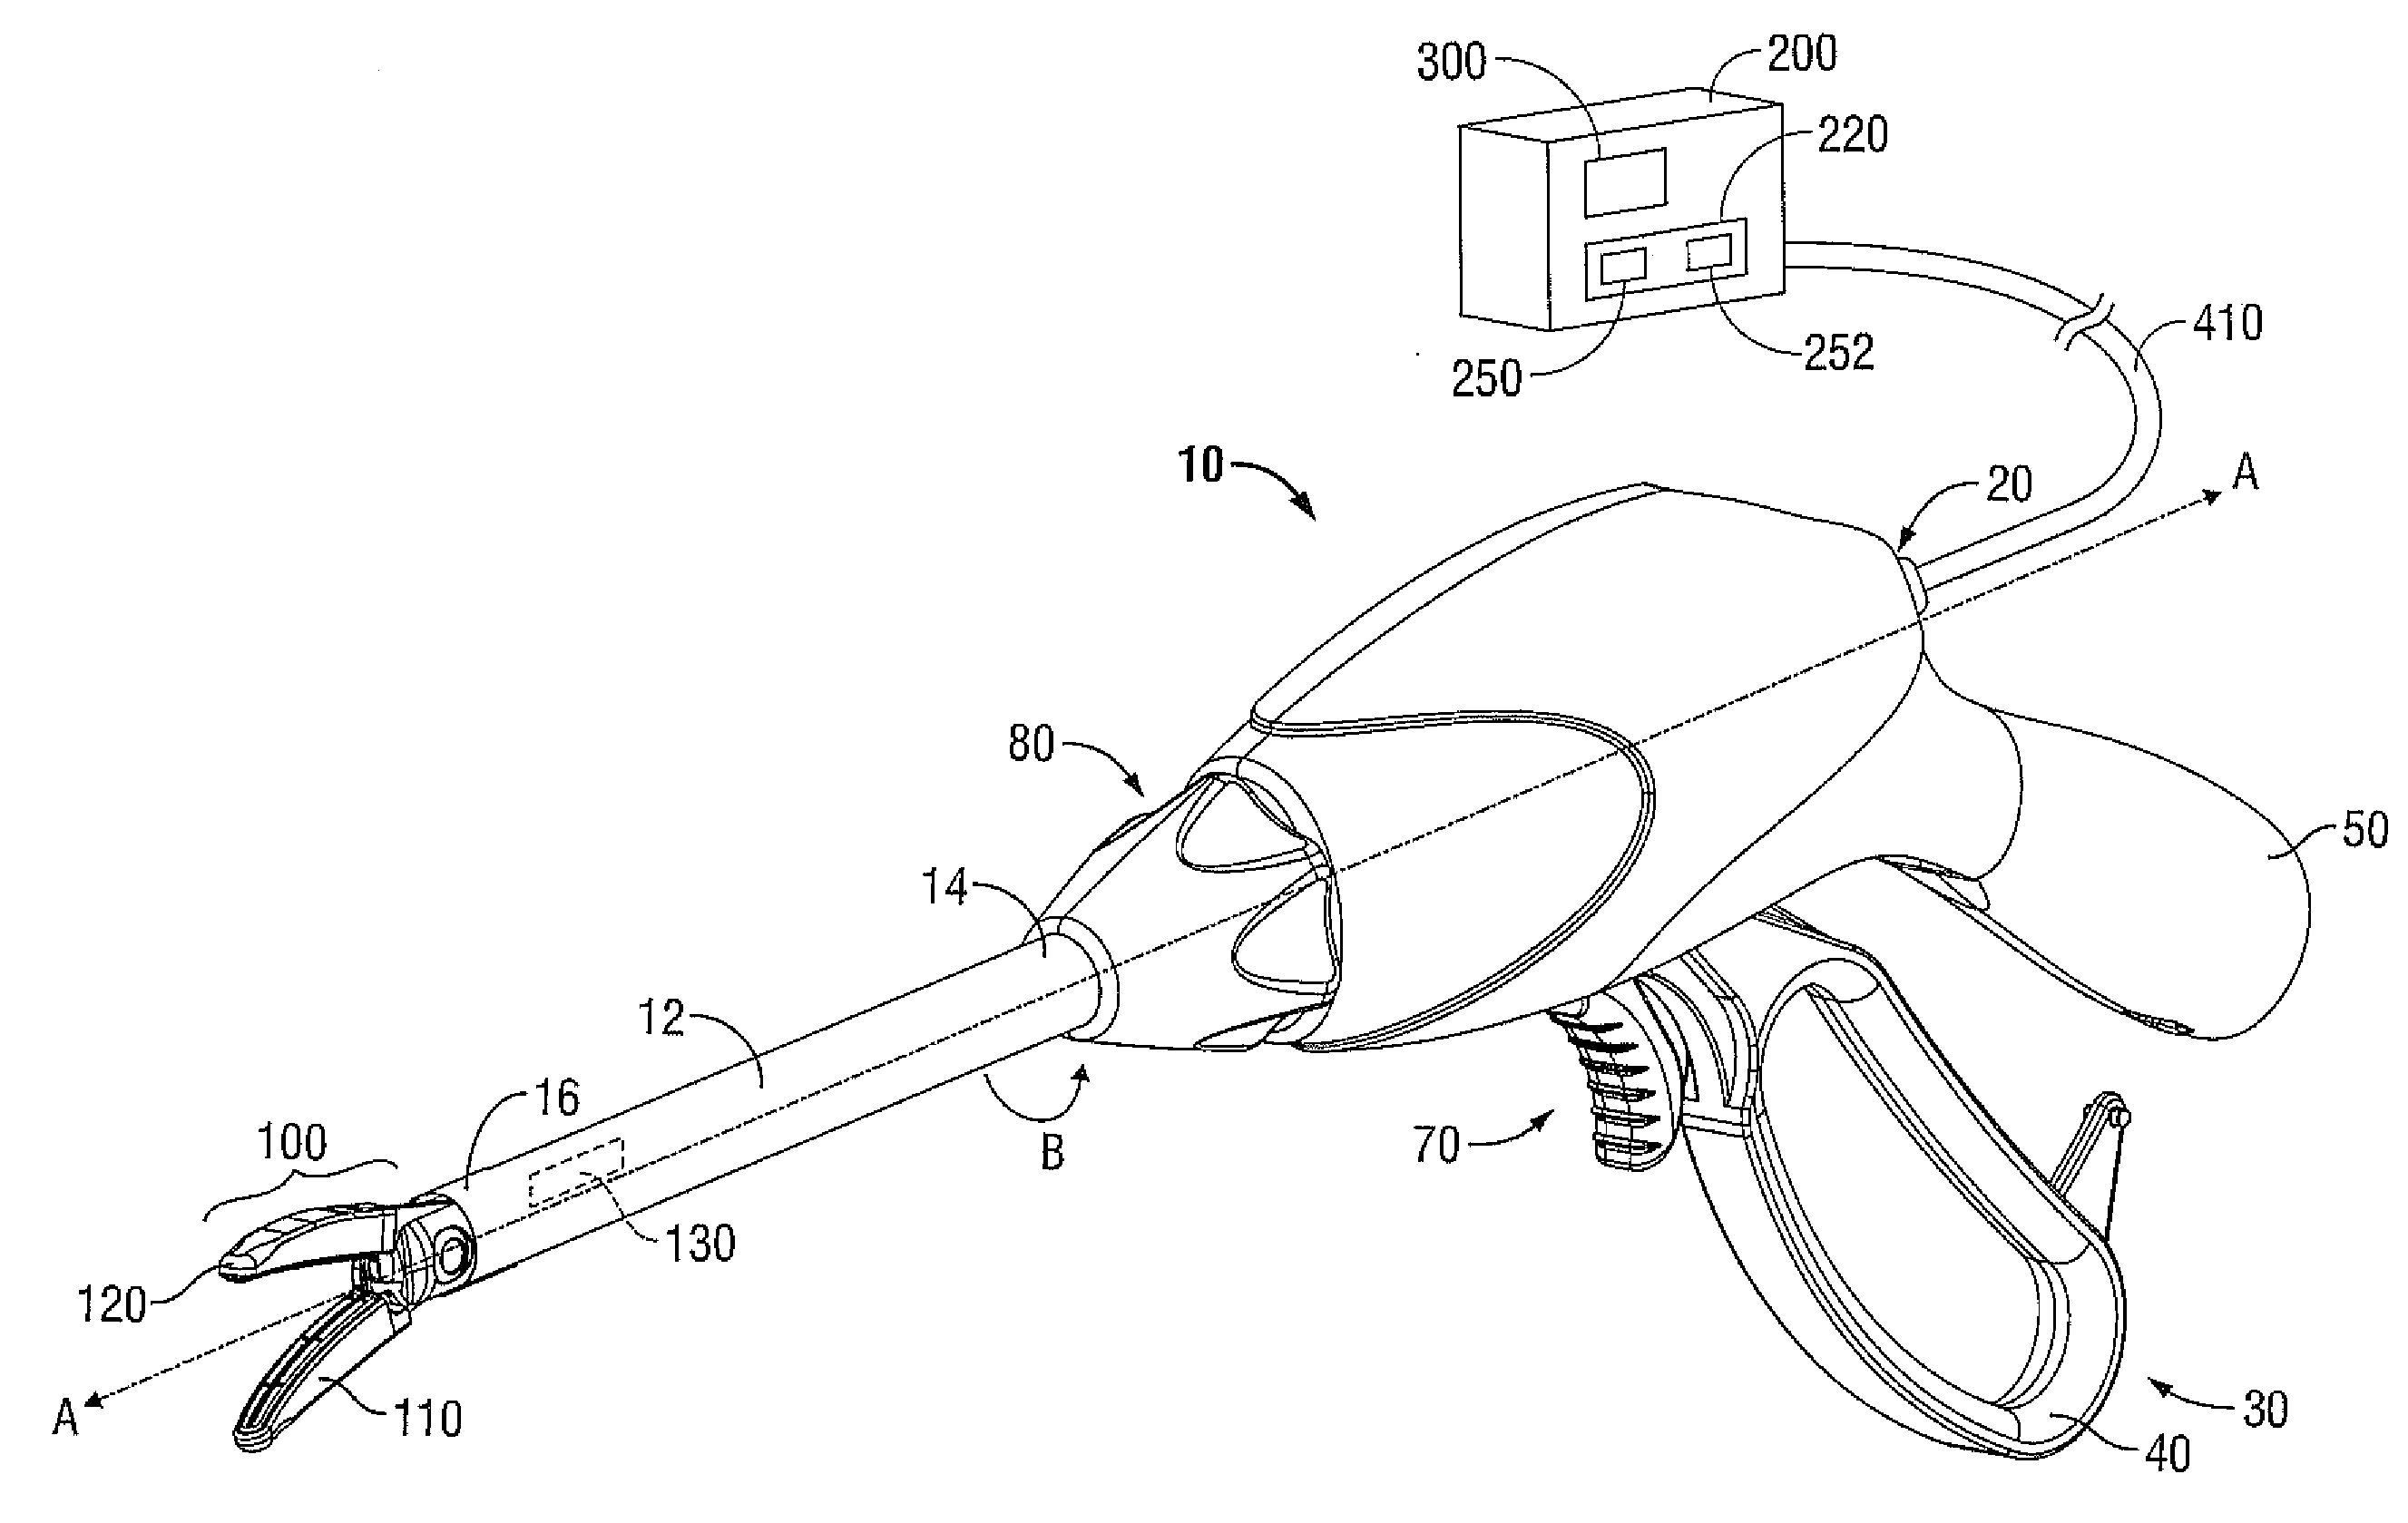 Apparatus, System, and Method for Performing an Electrosurgical Procedure